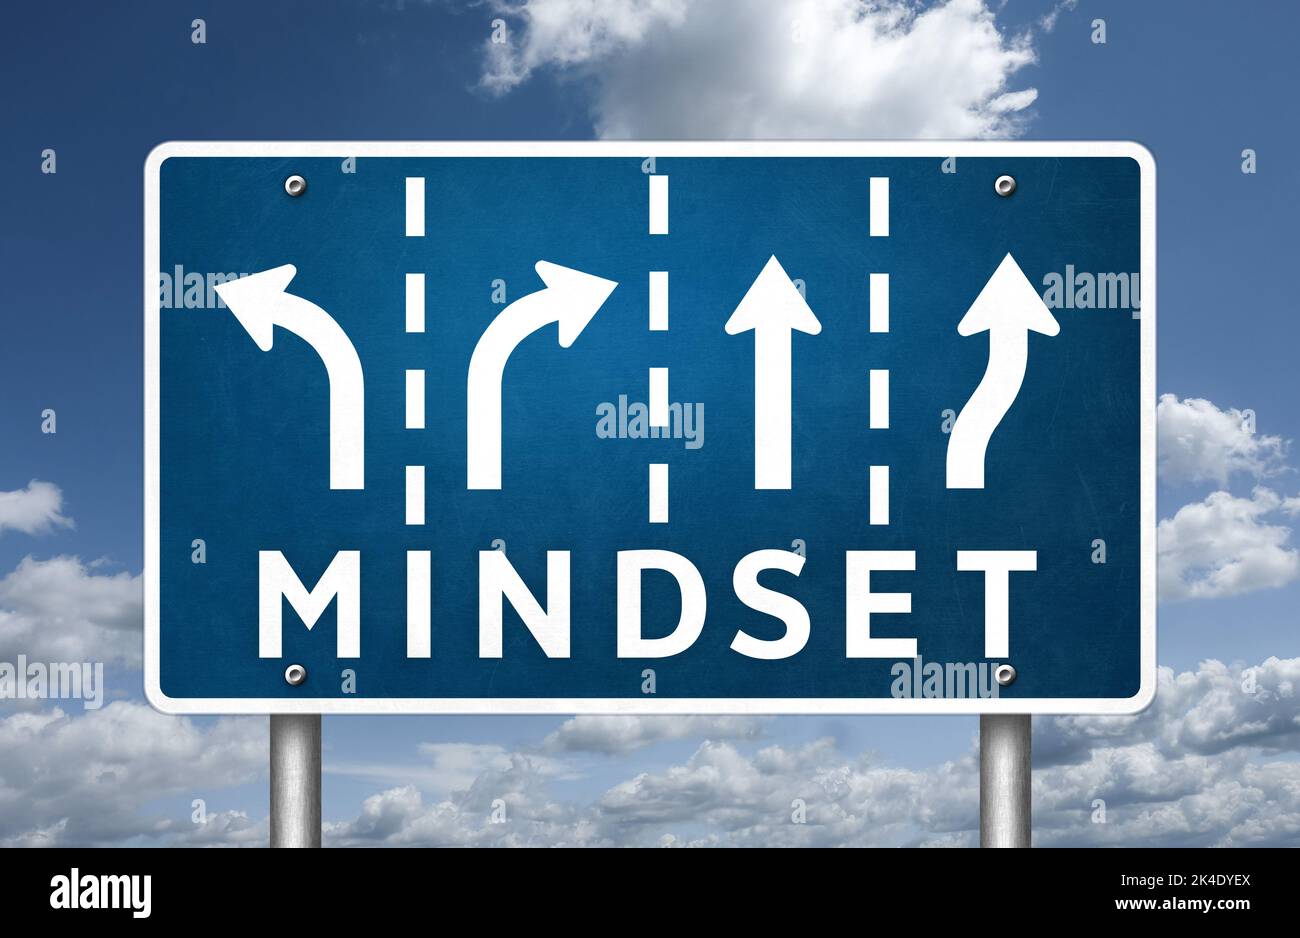 Mindset - road sign concept Stock Photo